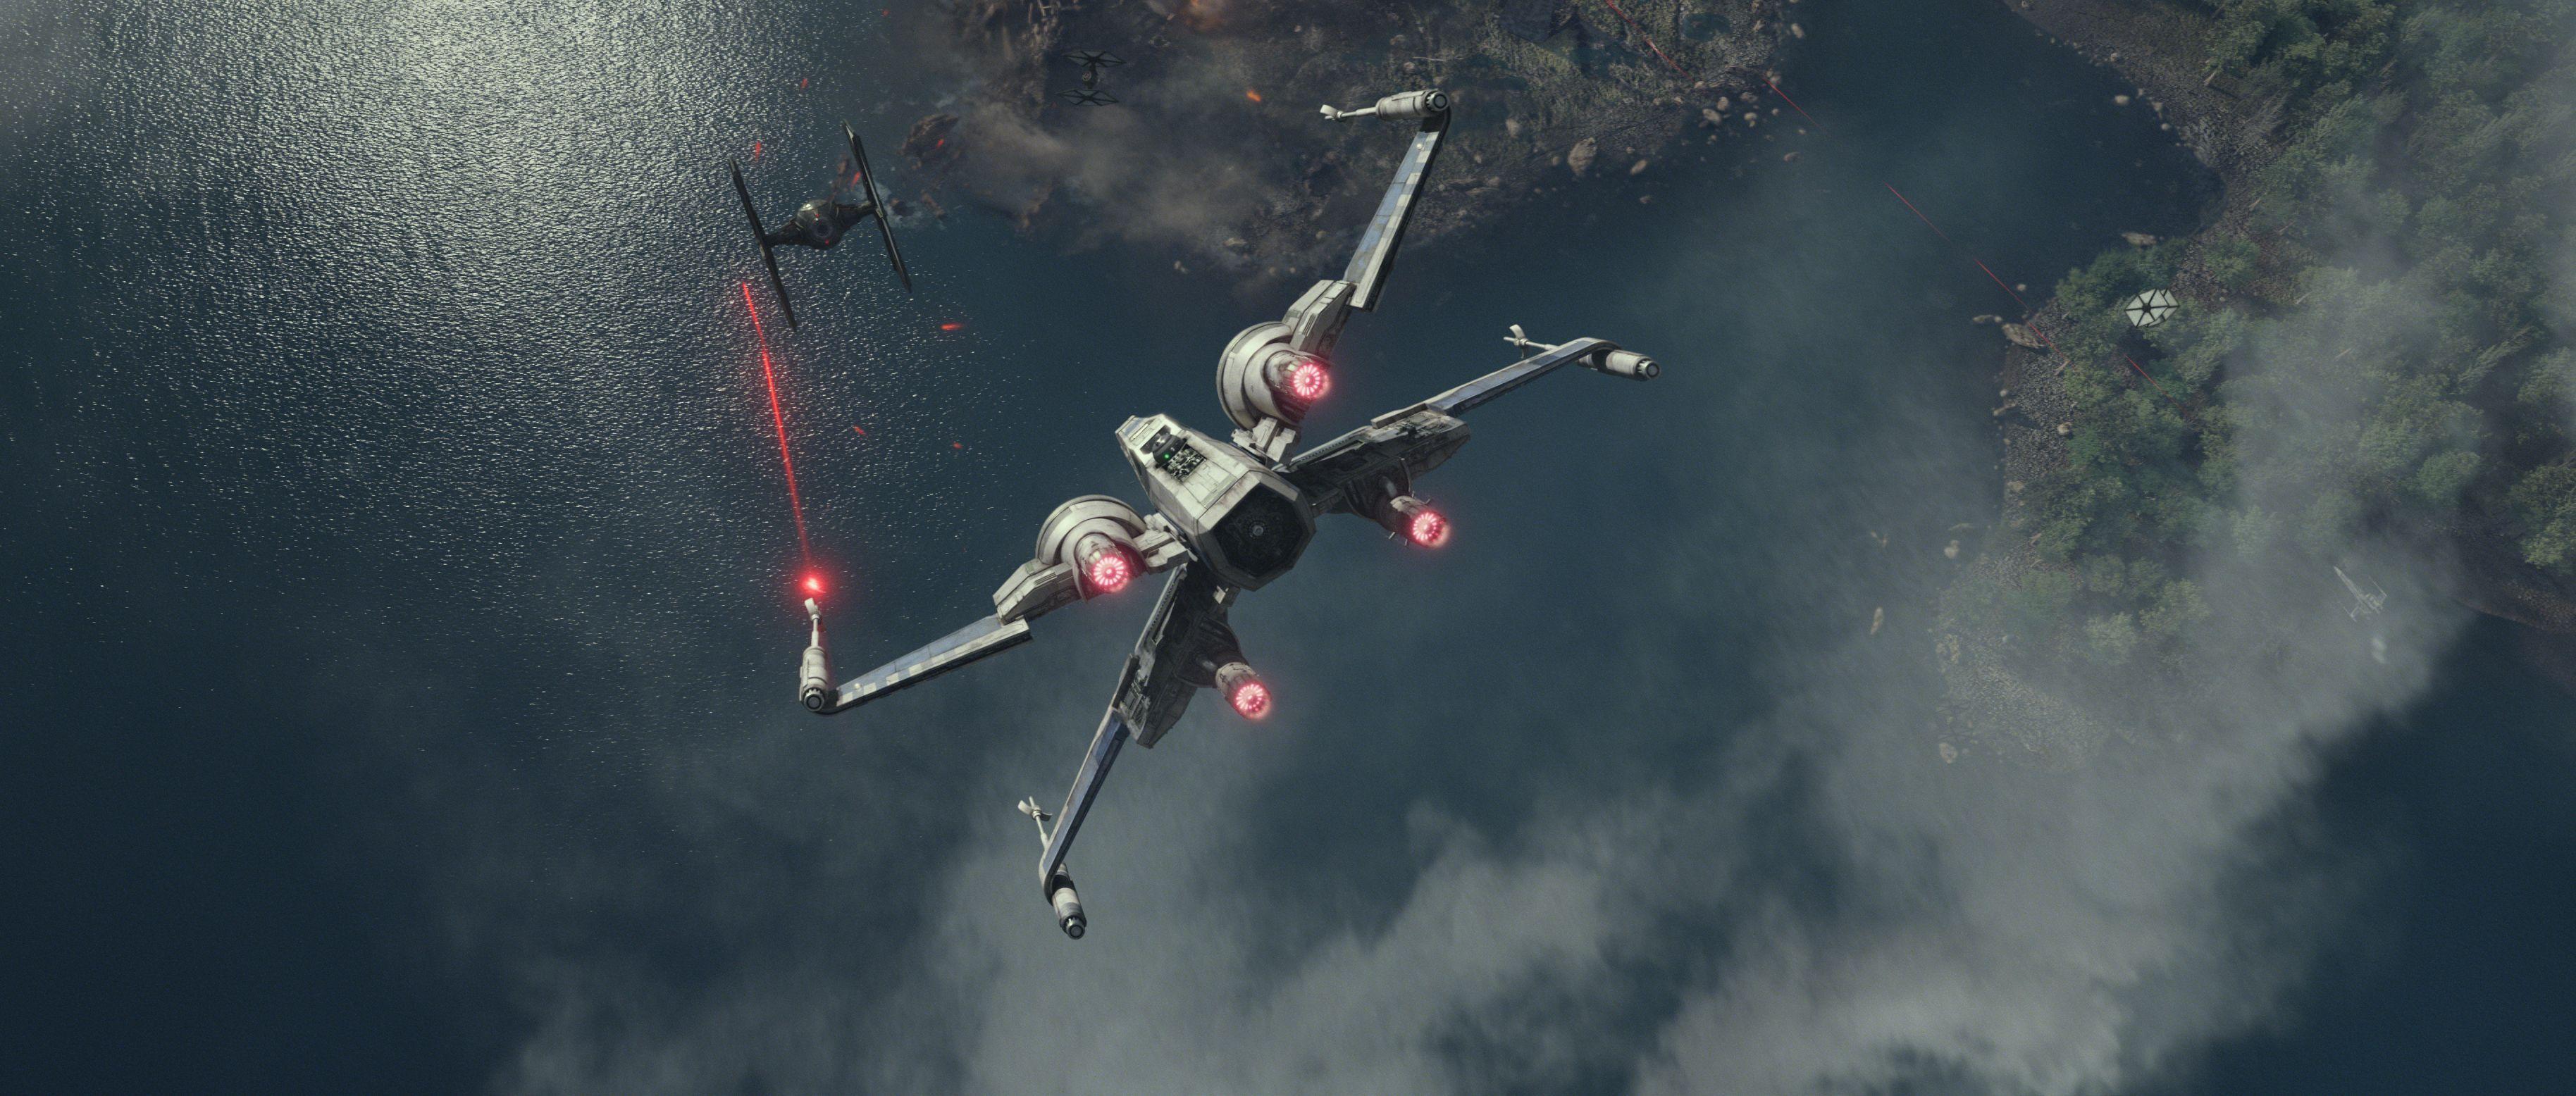 Grab a Star Wars: The Force Awakens wallpapers with these new high